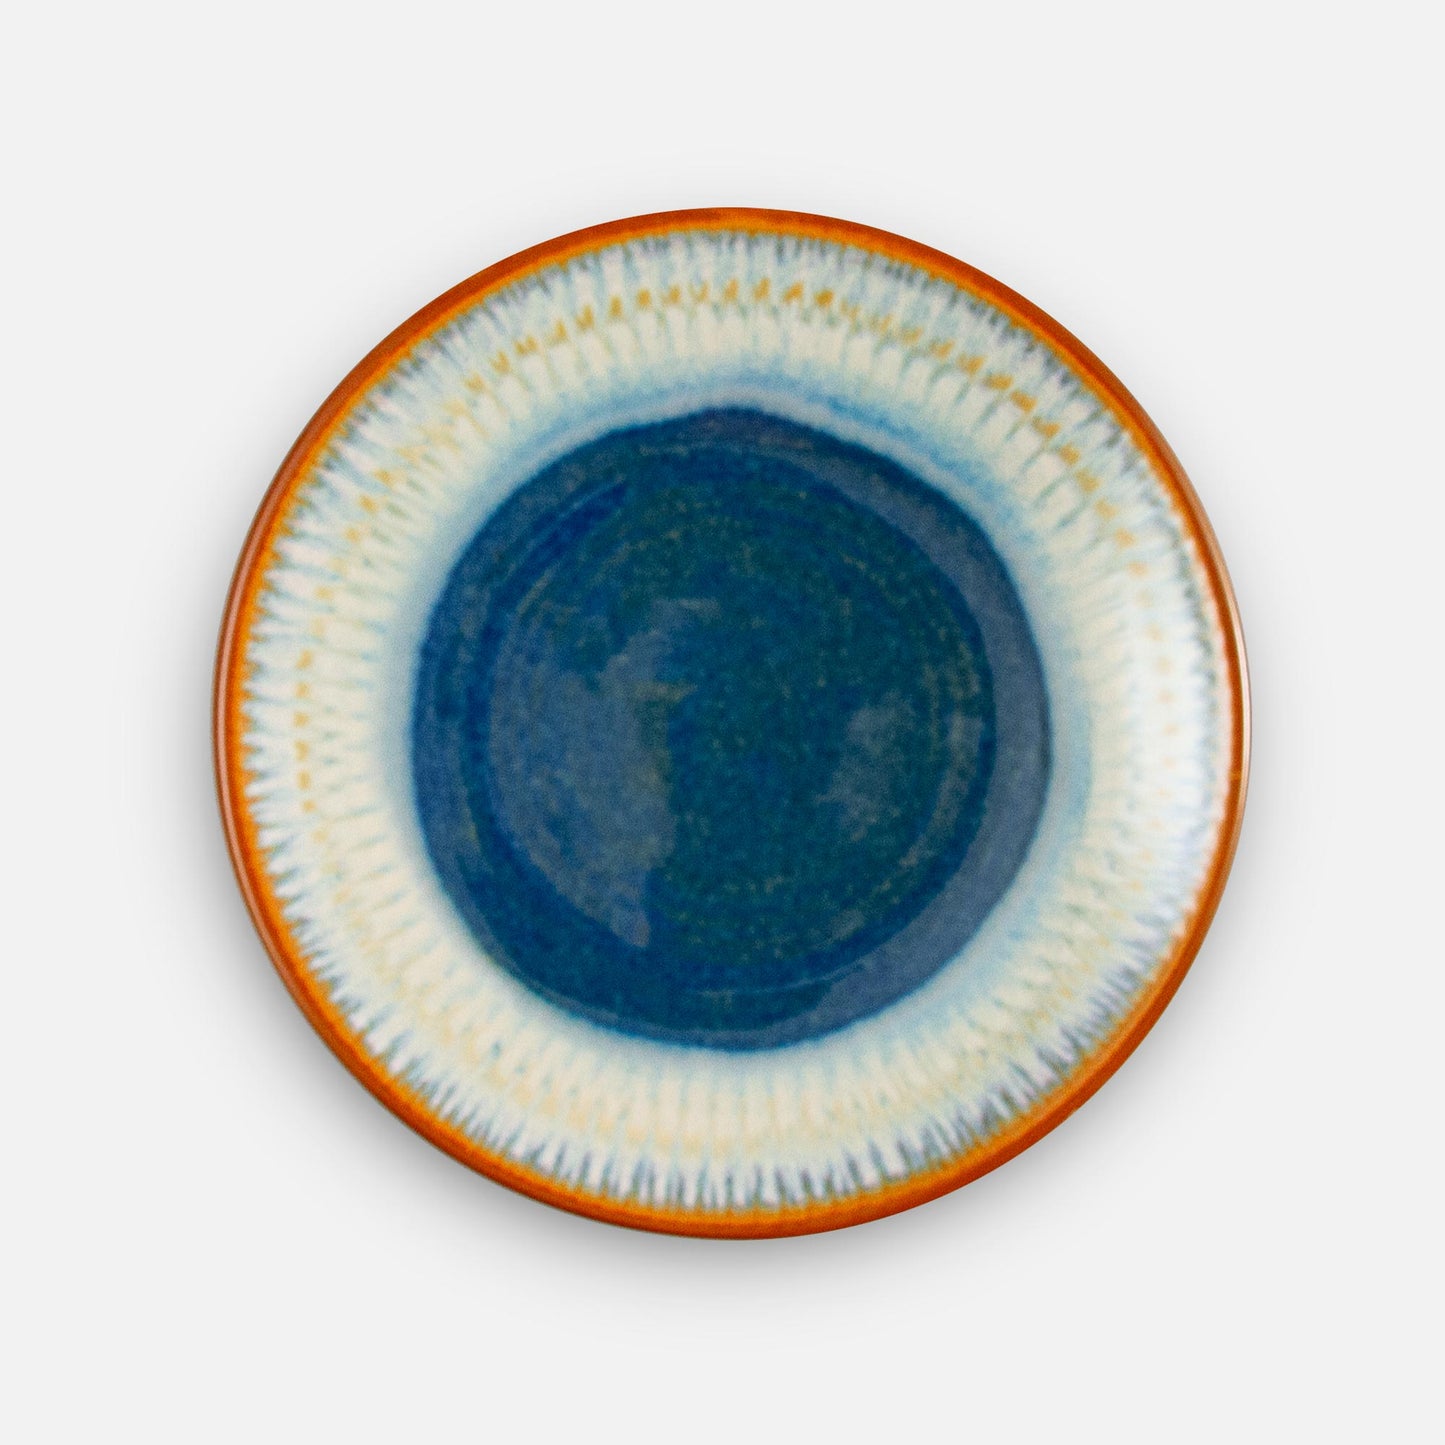 Handmade Pottery Rimless Dinner Plate made by Georgetown Pottery in Maine in Cobalt Pattern